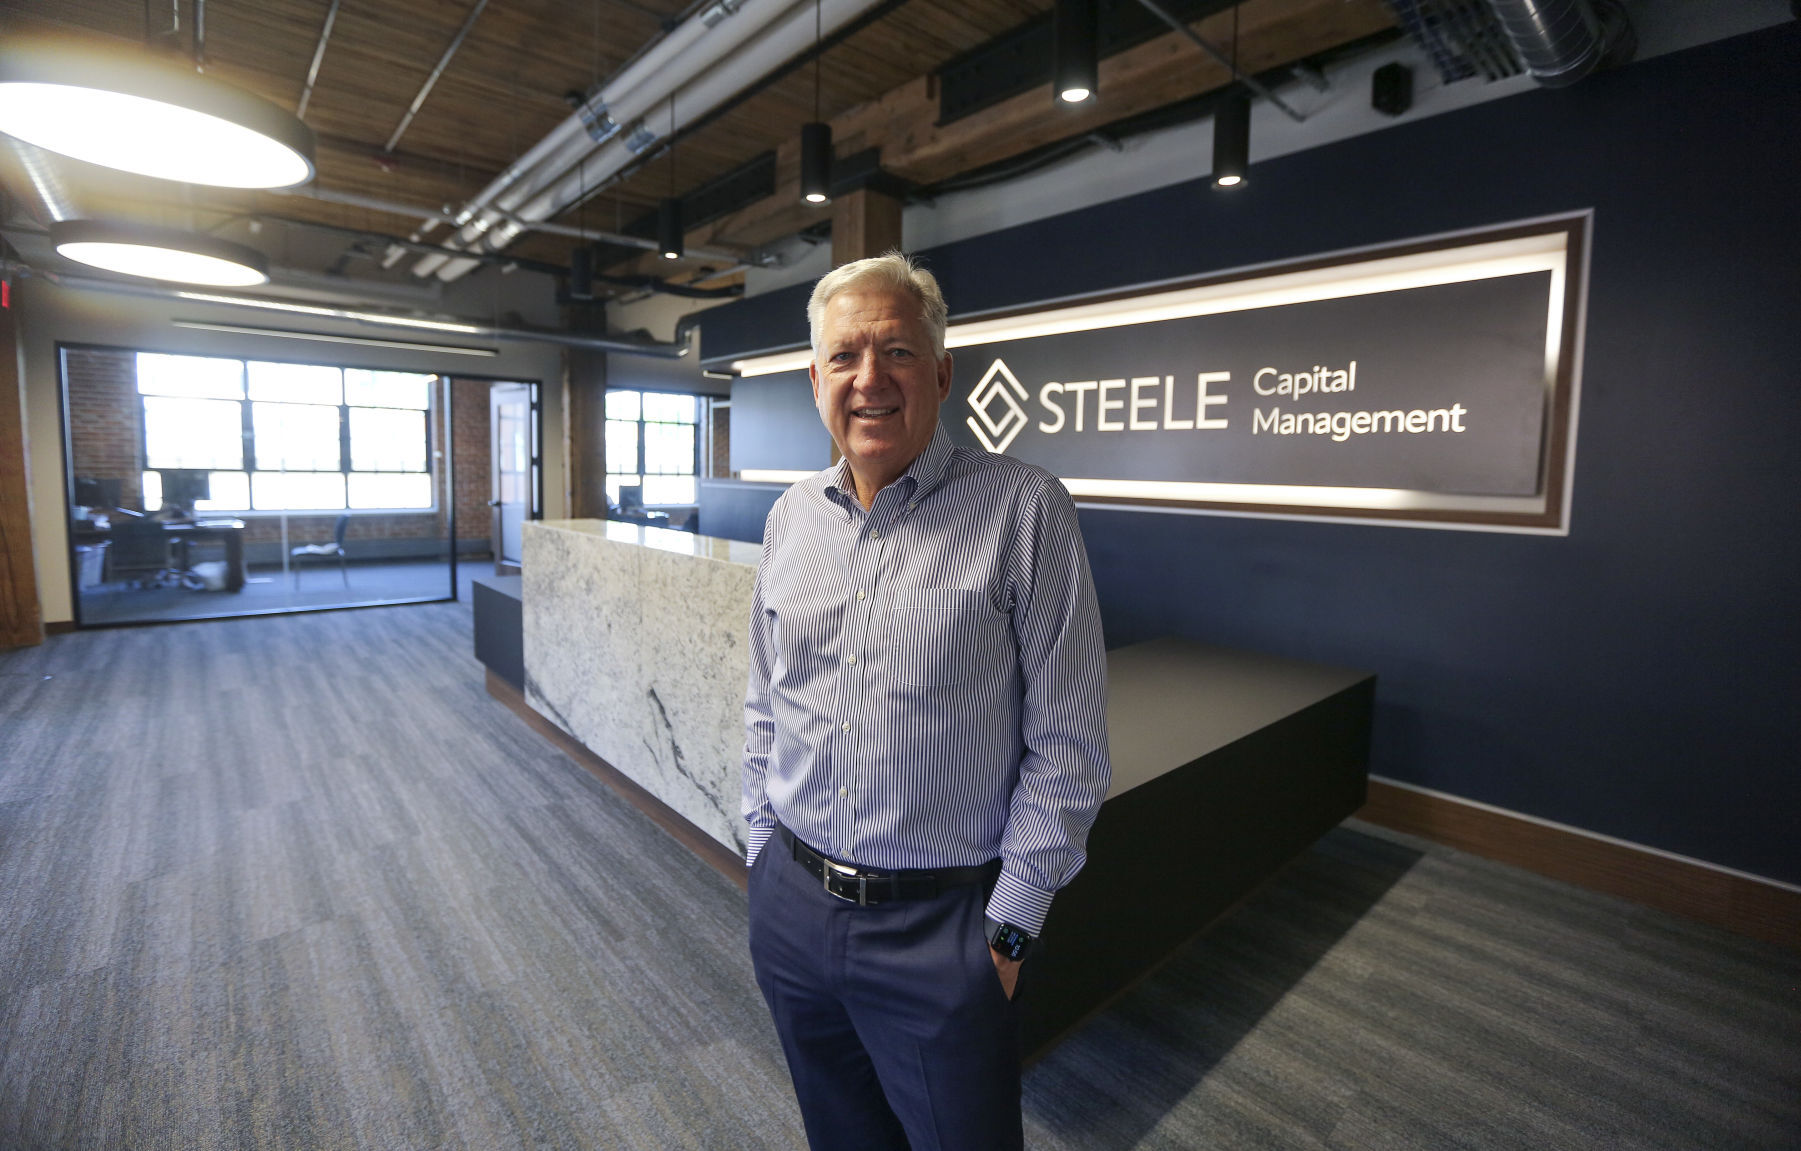 Steele Capital Management CEO Michael Steele inside the new office at the Dupaco Voices Building at 1000 Jackson St., on Thursday, June 2, 2022.    PHOTO CREDIT: Dave Kettering